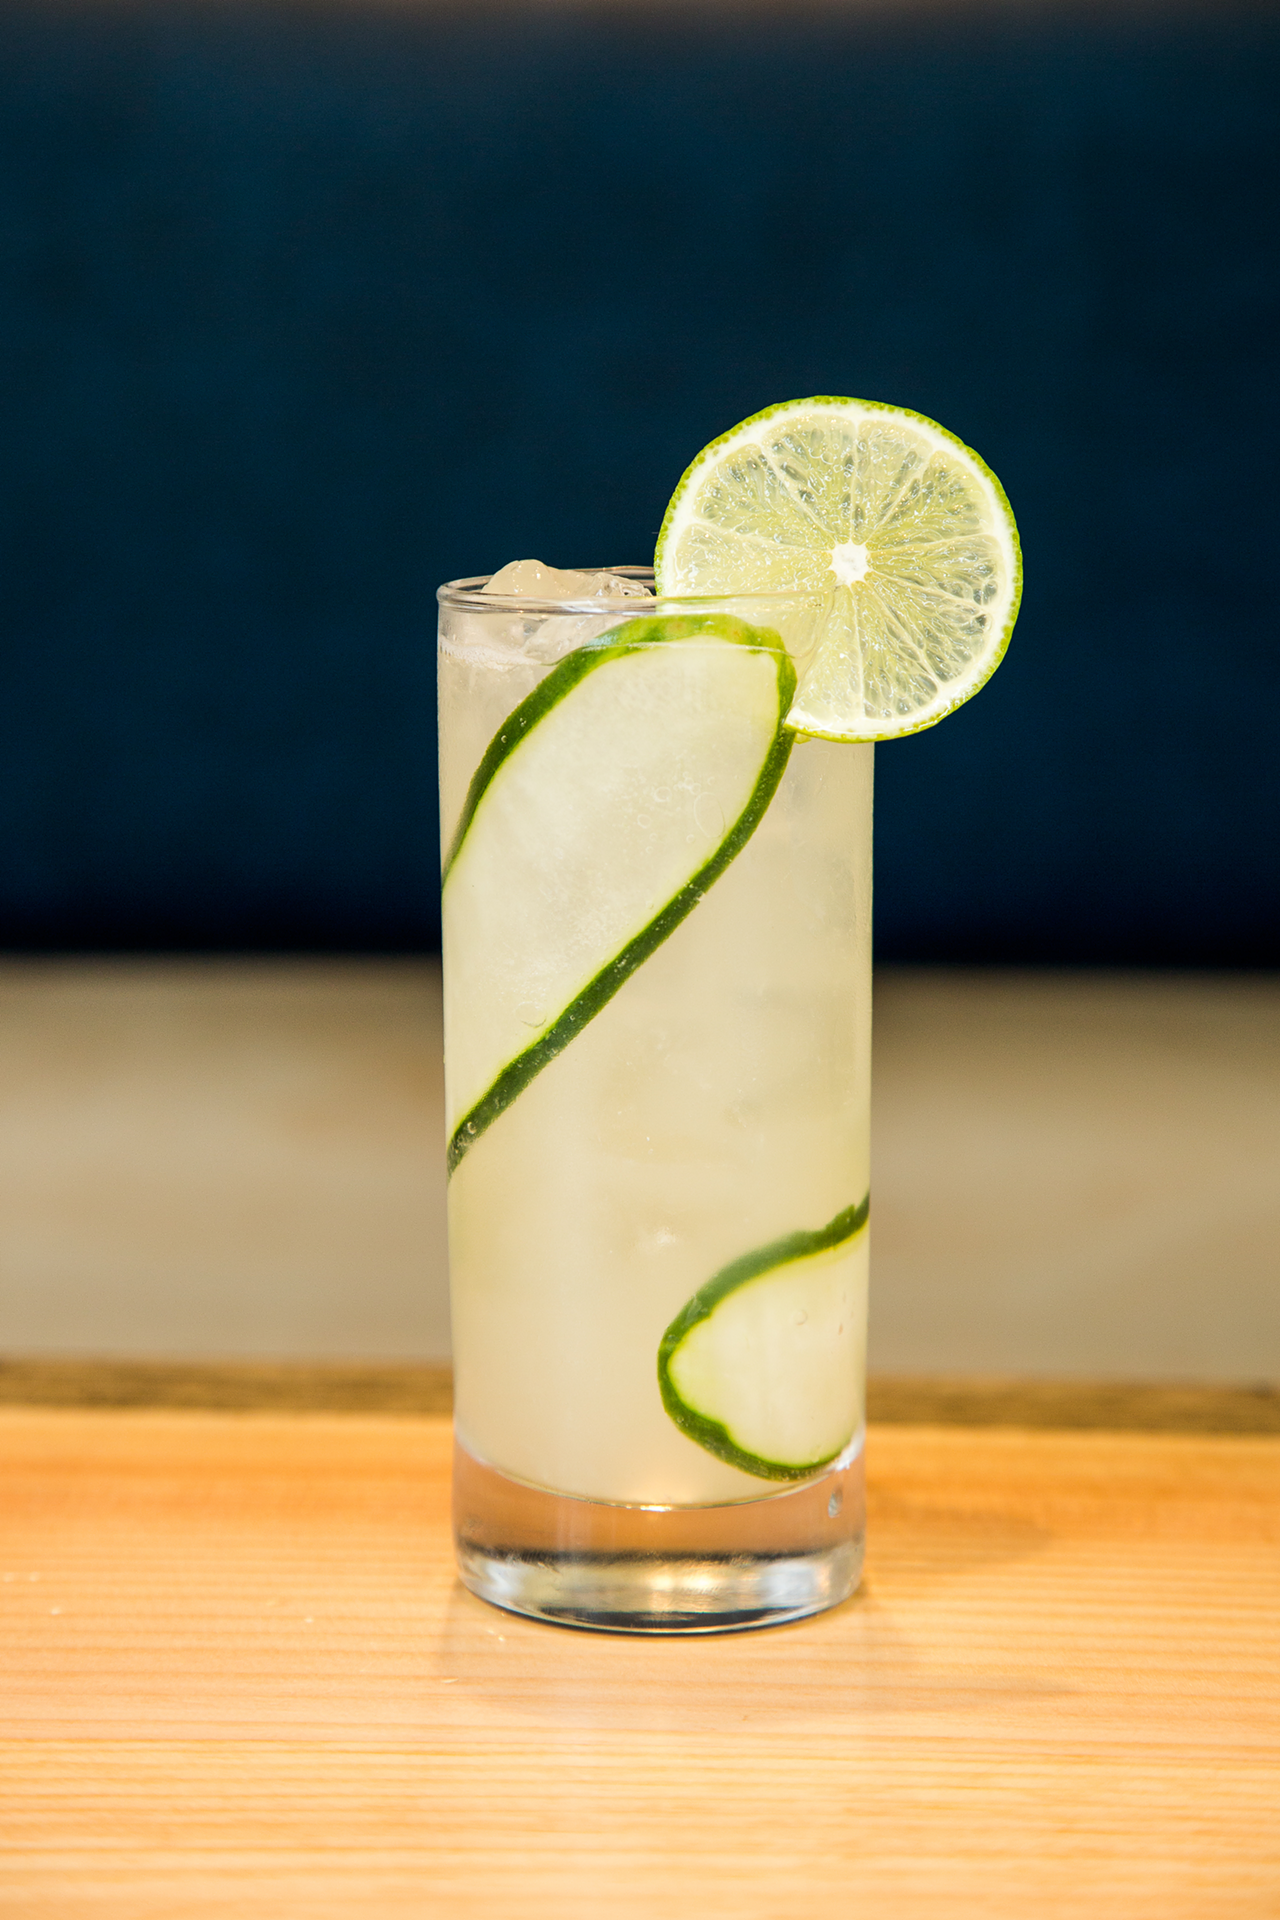 The Royal Garden cocktail with tequila, sage, cucumber and lime